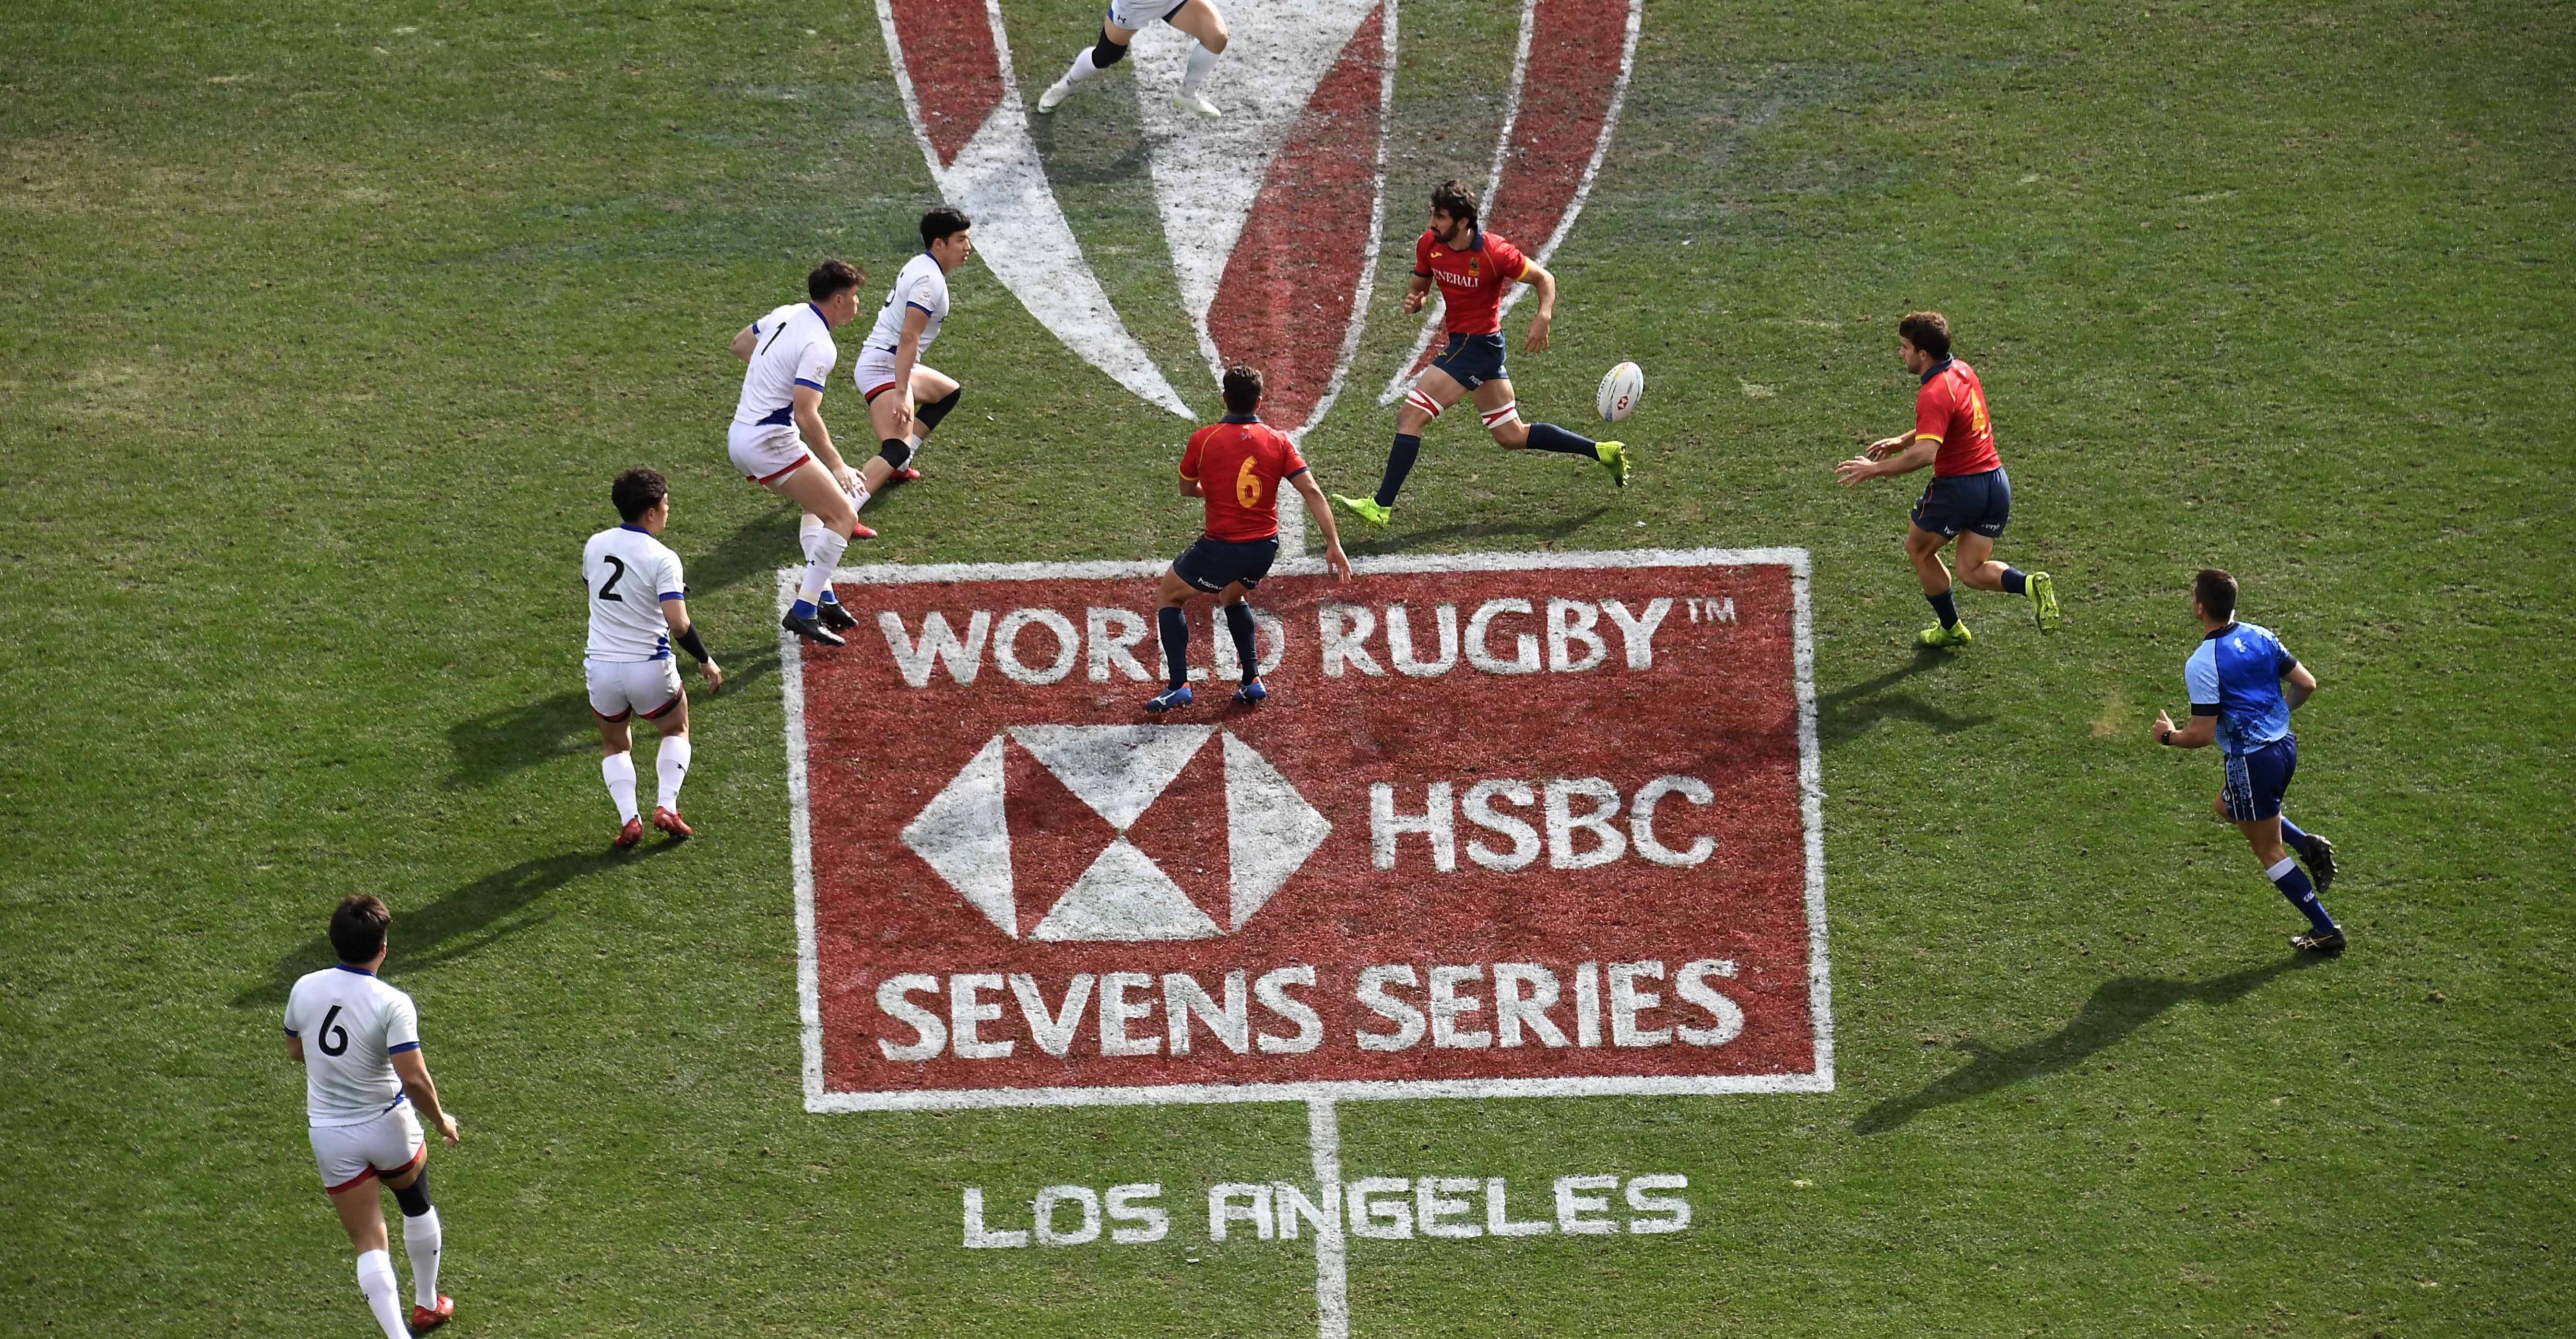 Looking Back at World Rugby Sevens History in the United States